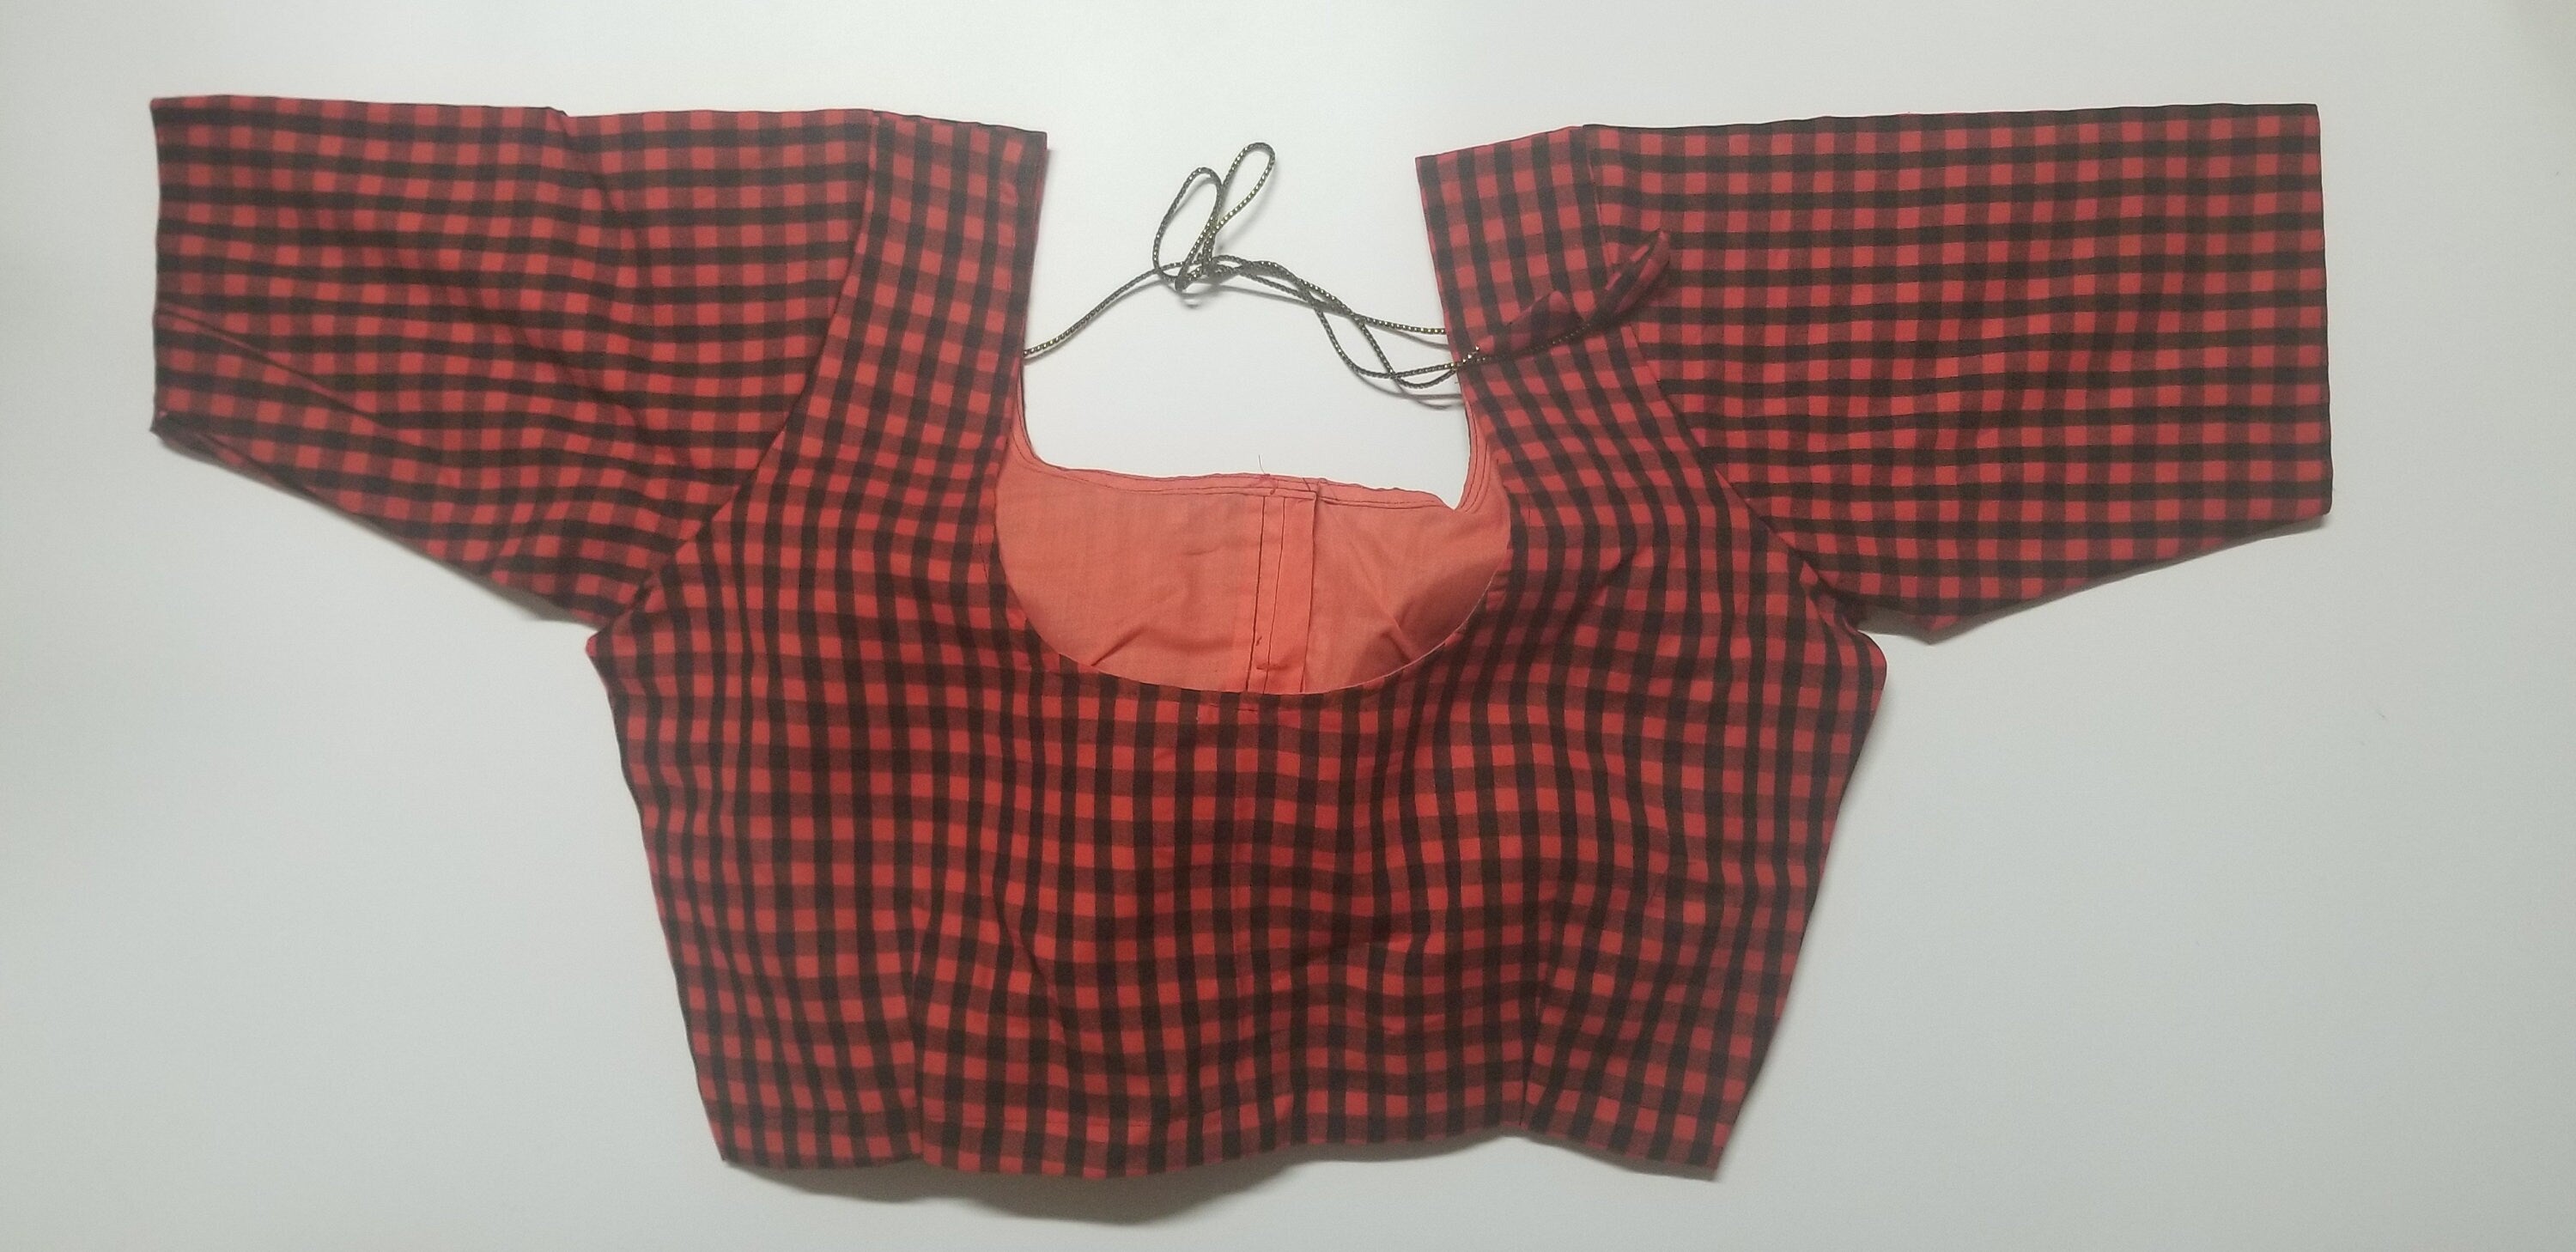 Readymade Saree Blouse - Red with Black checked Blouse - Plus size - Princess cut padded - size 42" (alter 38" to 46")